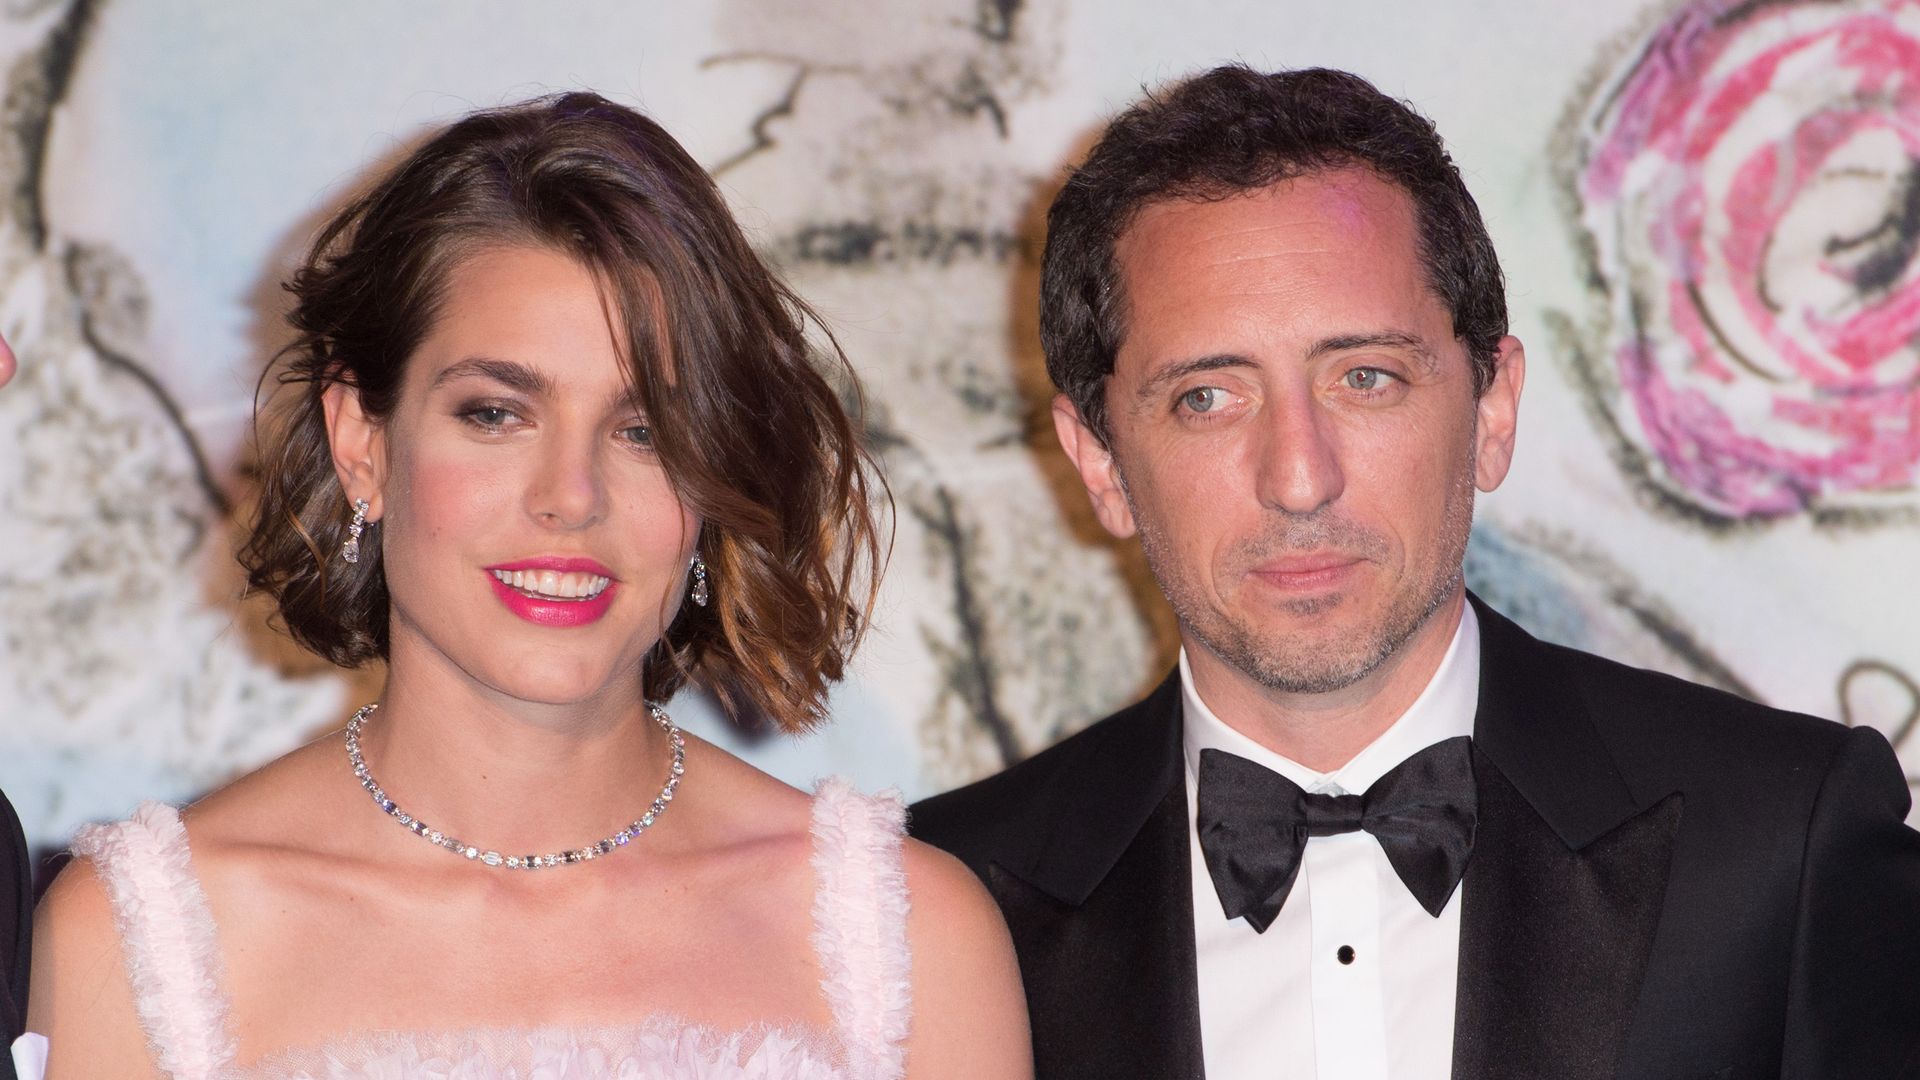 Charlotte Casiraghi and Gad Elmaleh at the Rose Ball in 2013